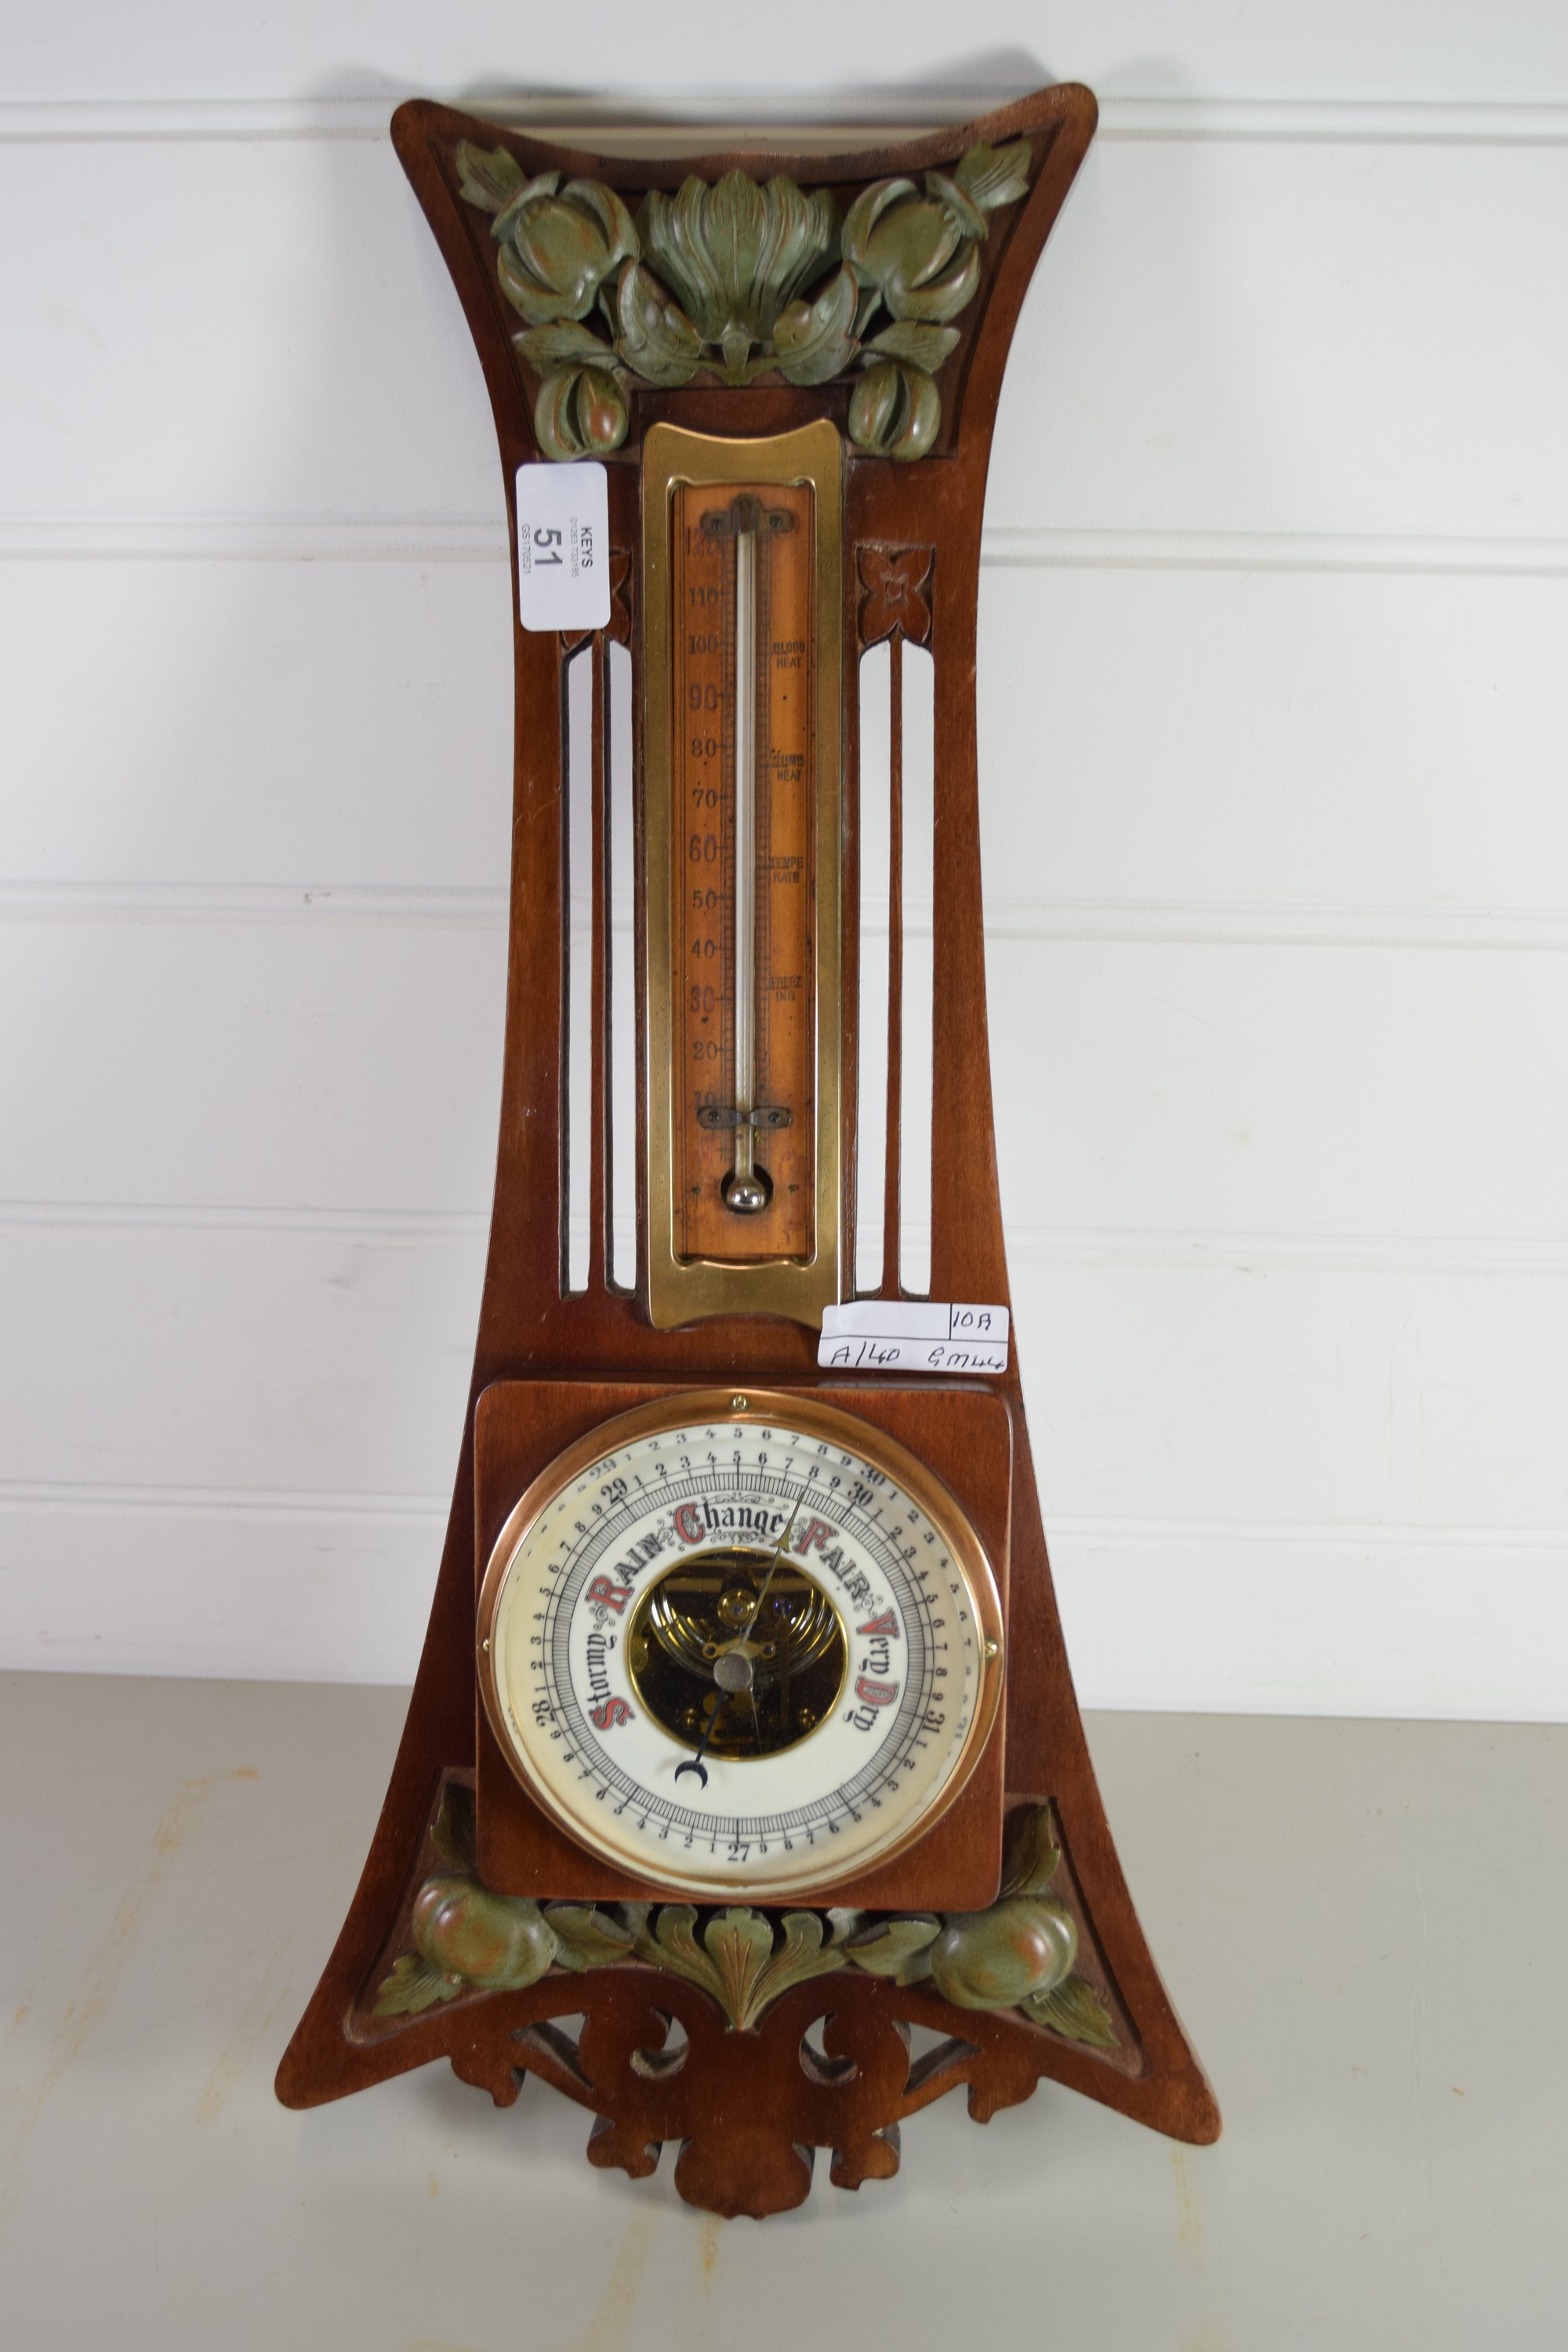 CIRCULAR BAROMETER AND THERMOMETER IN WOODEN FRAME